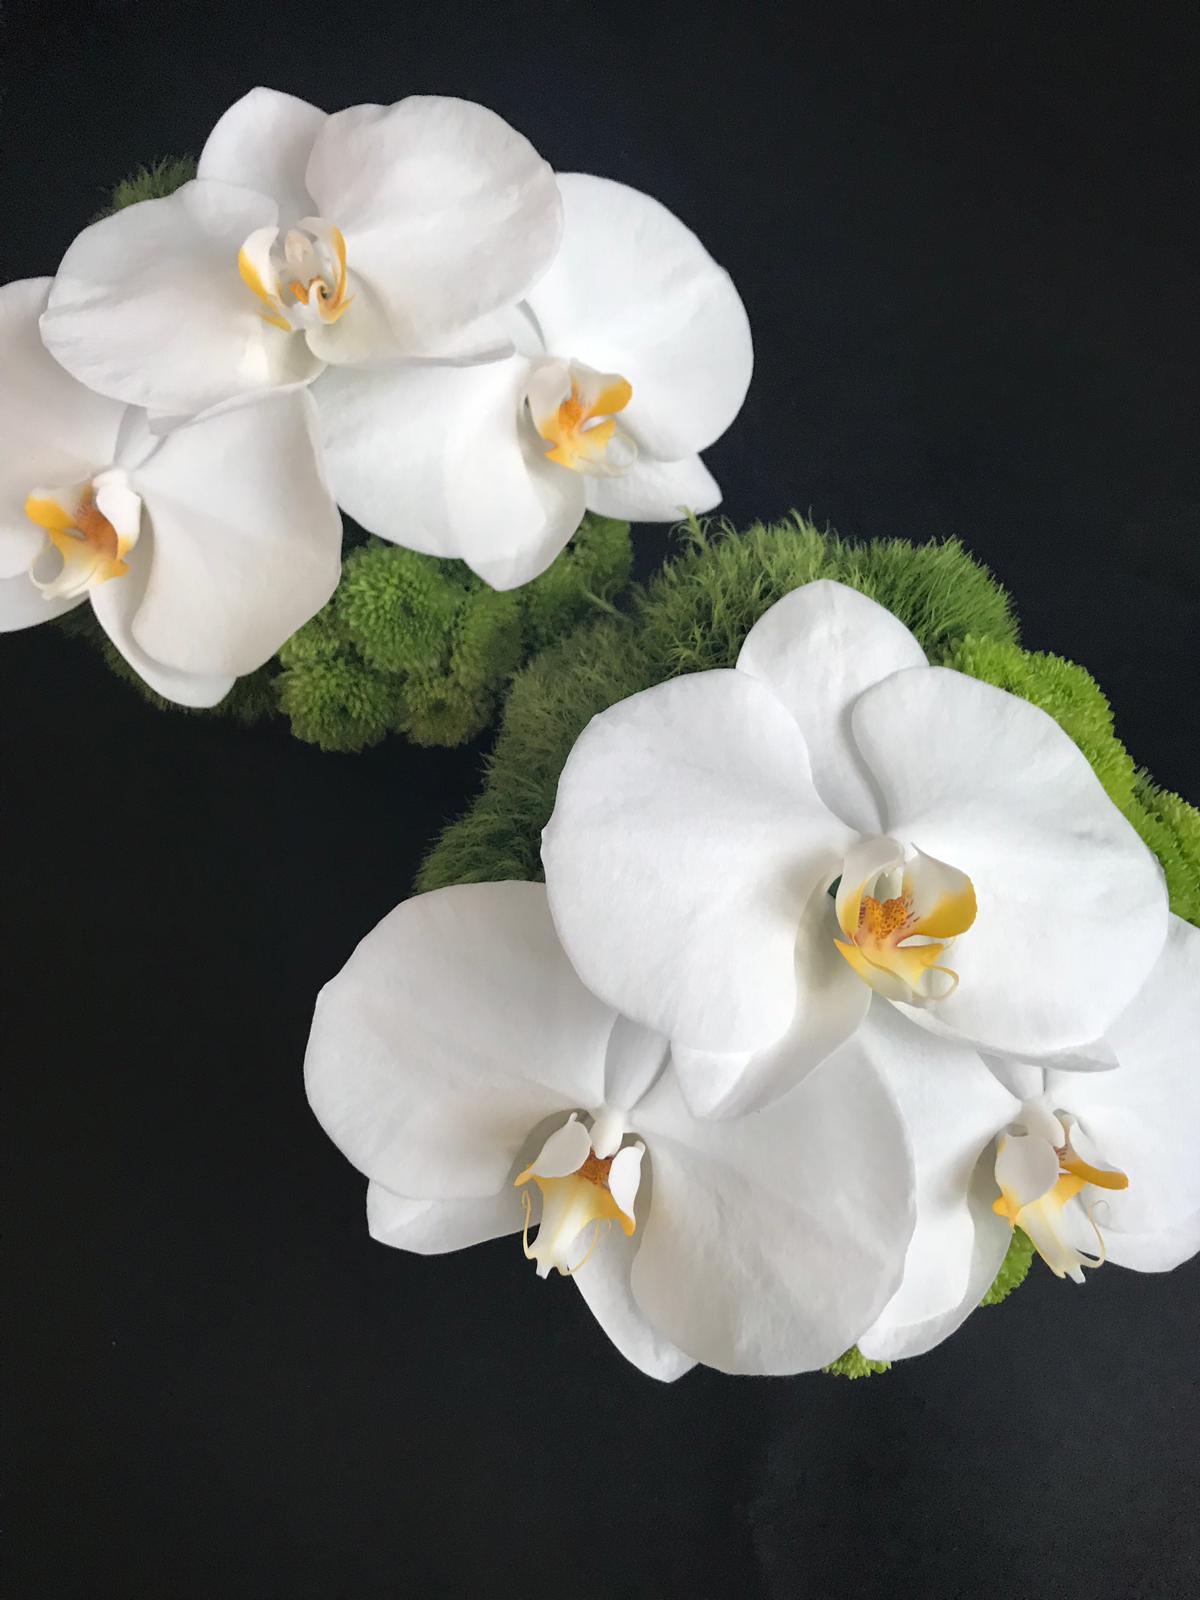 Table arrangement with phalaenopsis orchids